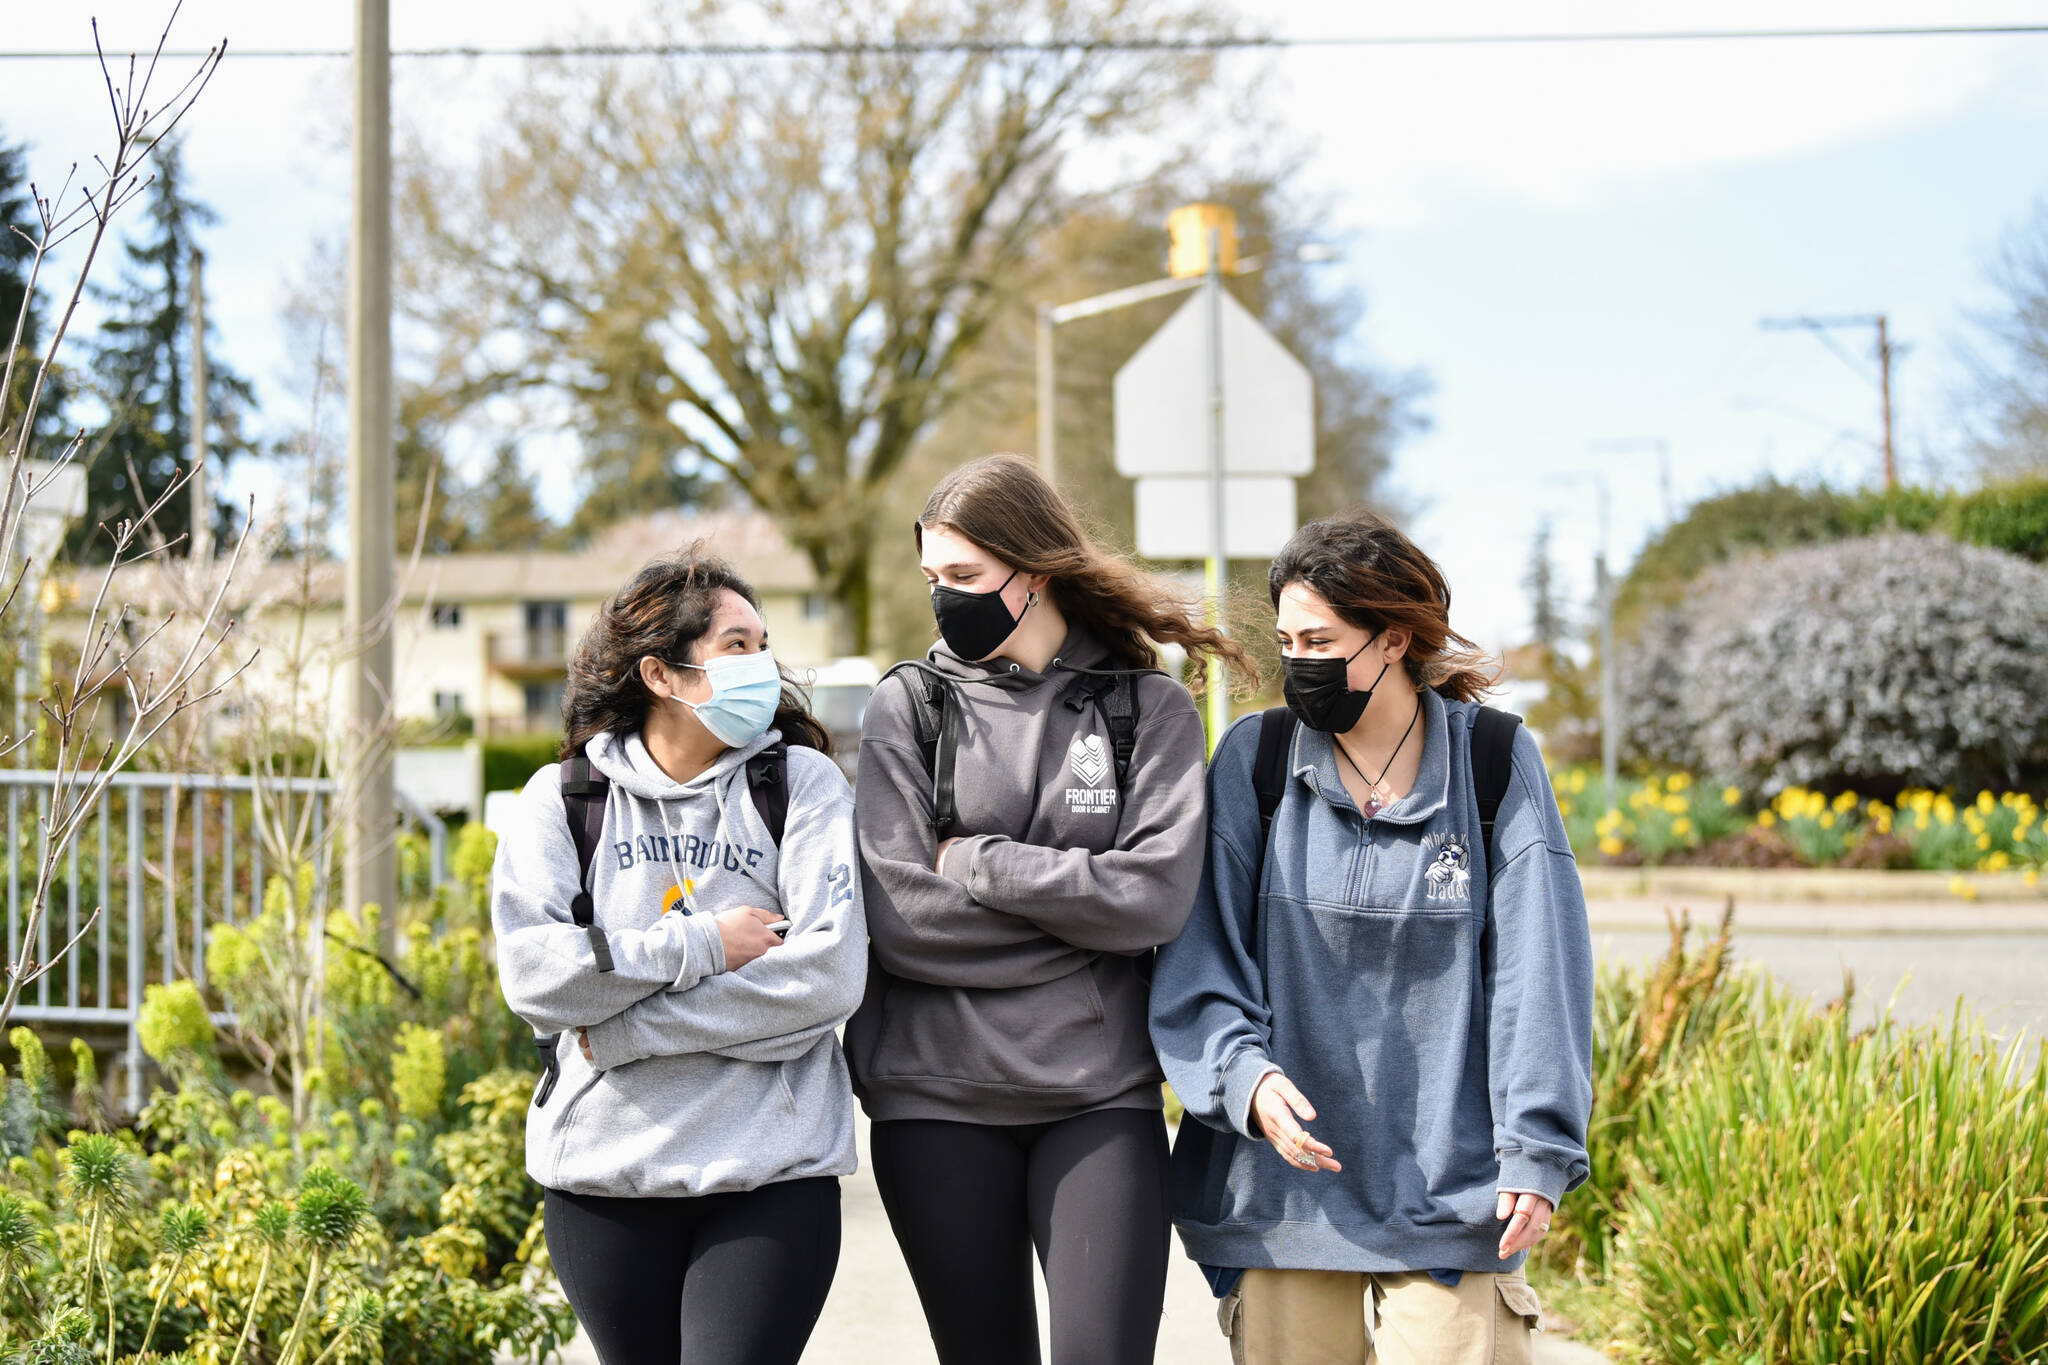 BHS juniors Olivia O’Rourke, Rain Malzahn and Laura Carrillo walk to lunch Tuesday. They are adjusting to the change by wearing or removing their masks as they feel comfortable.